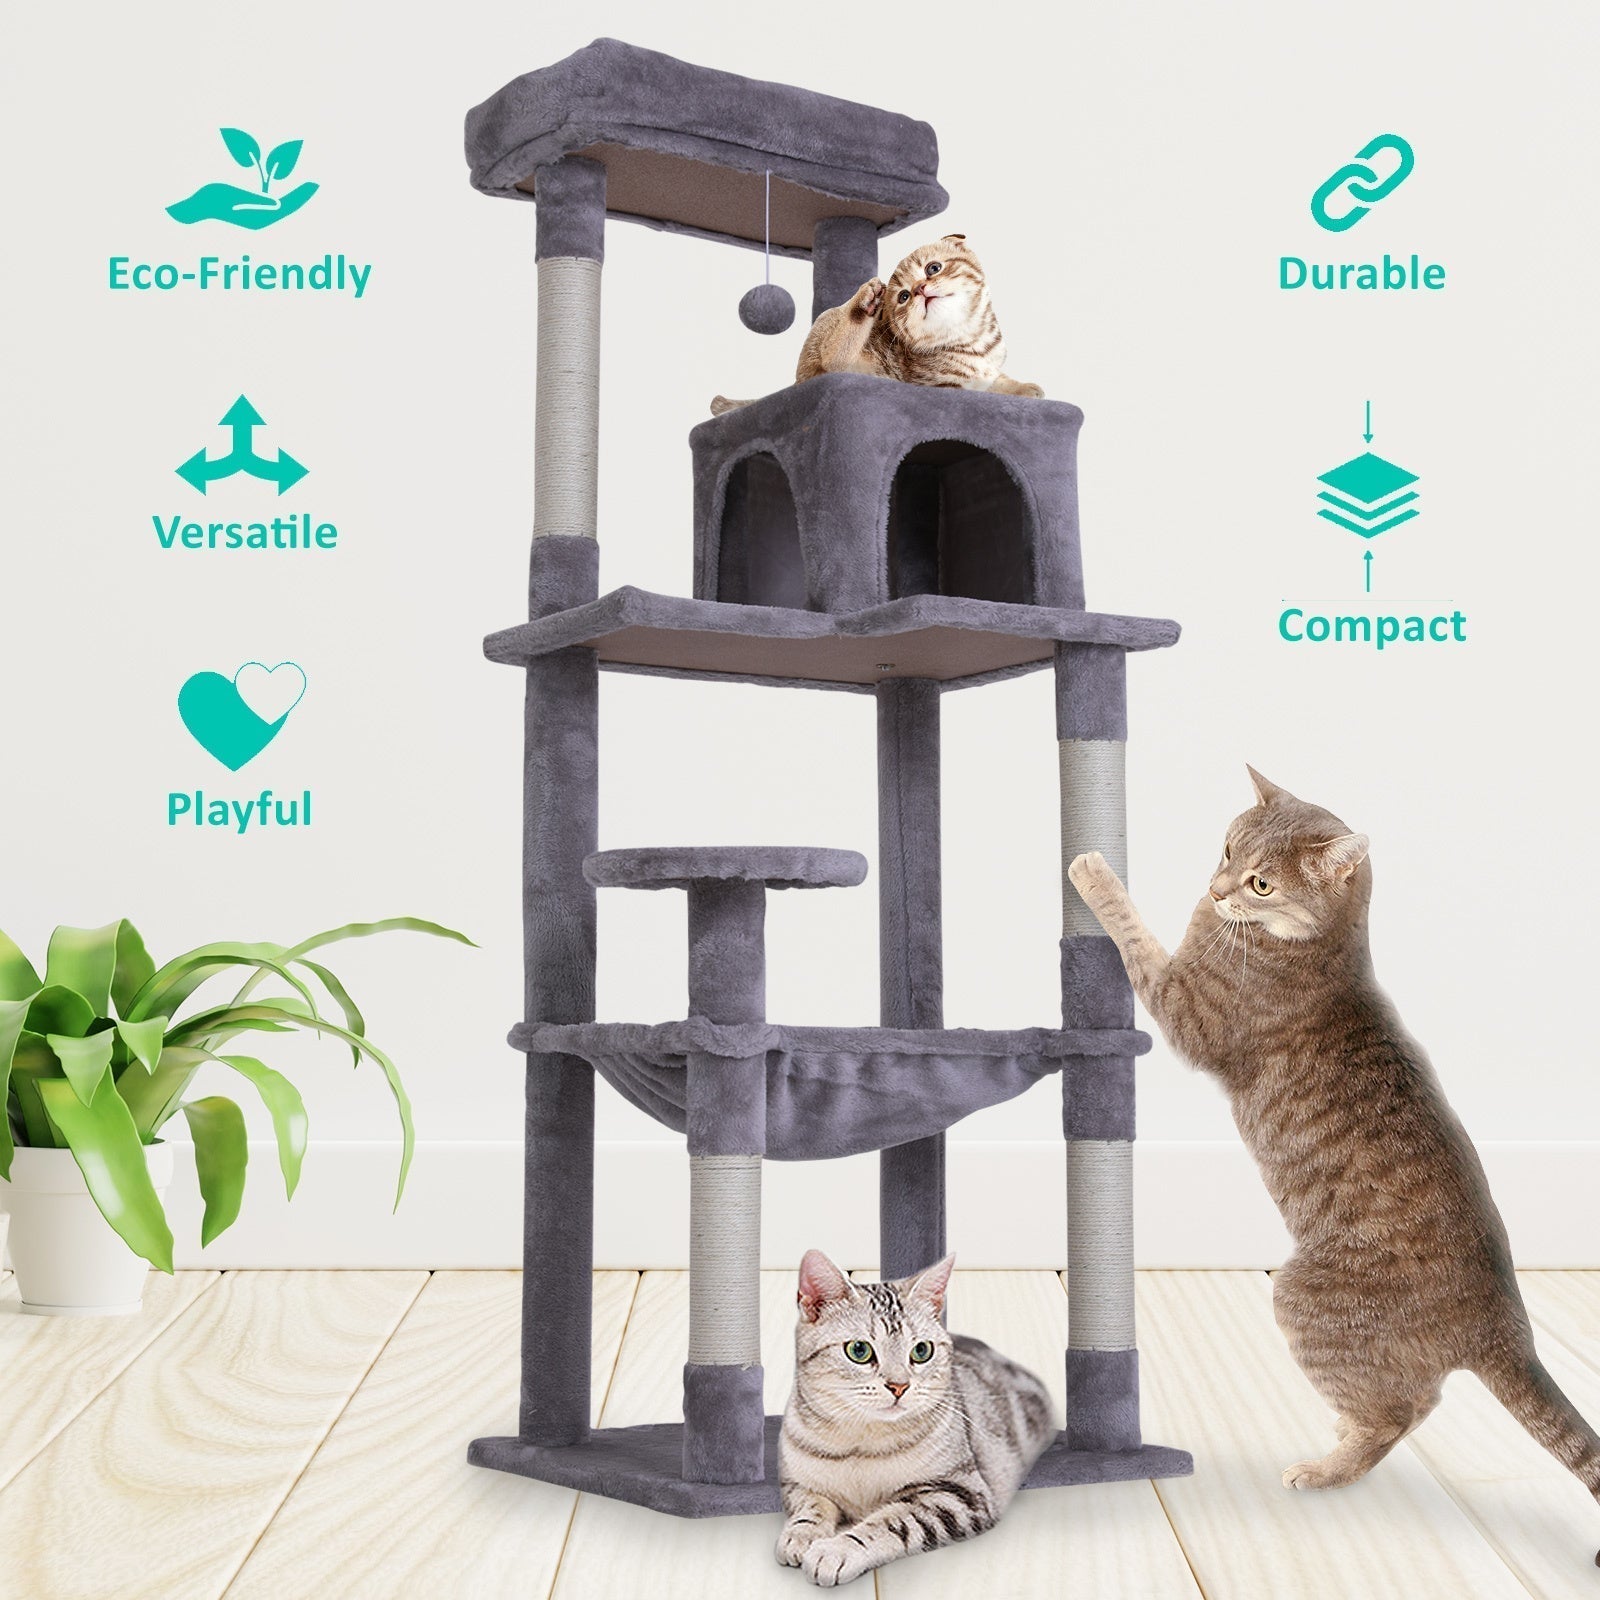 Paw Mate 143cm Grey Cat Tree CATOPIA Sisal Scratching Post Scratcher Pole Condo House Tower